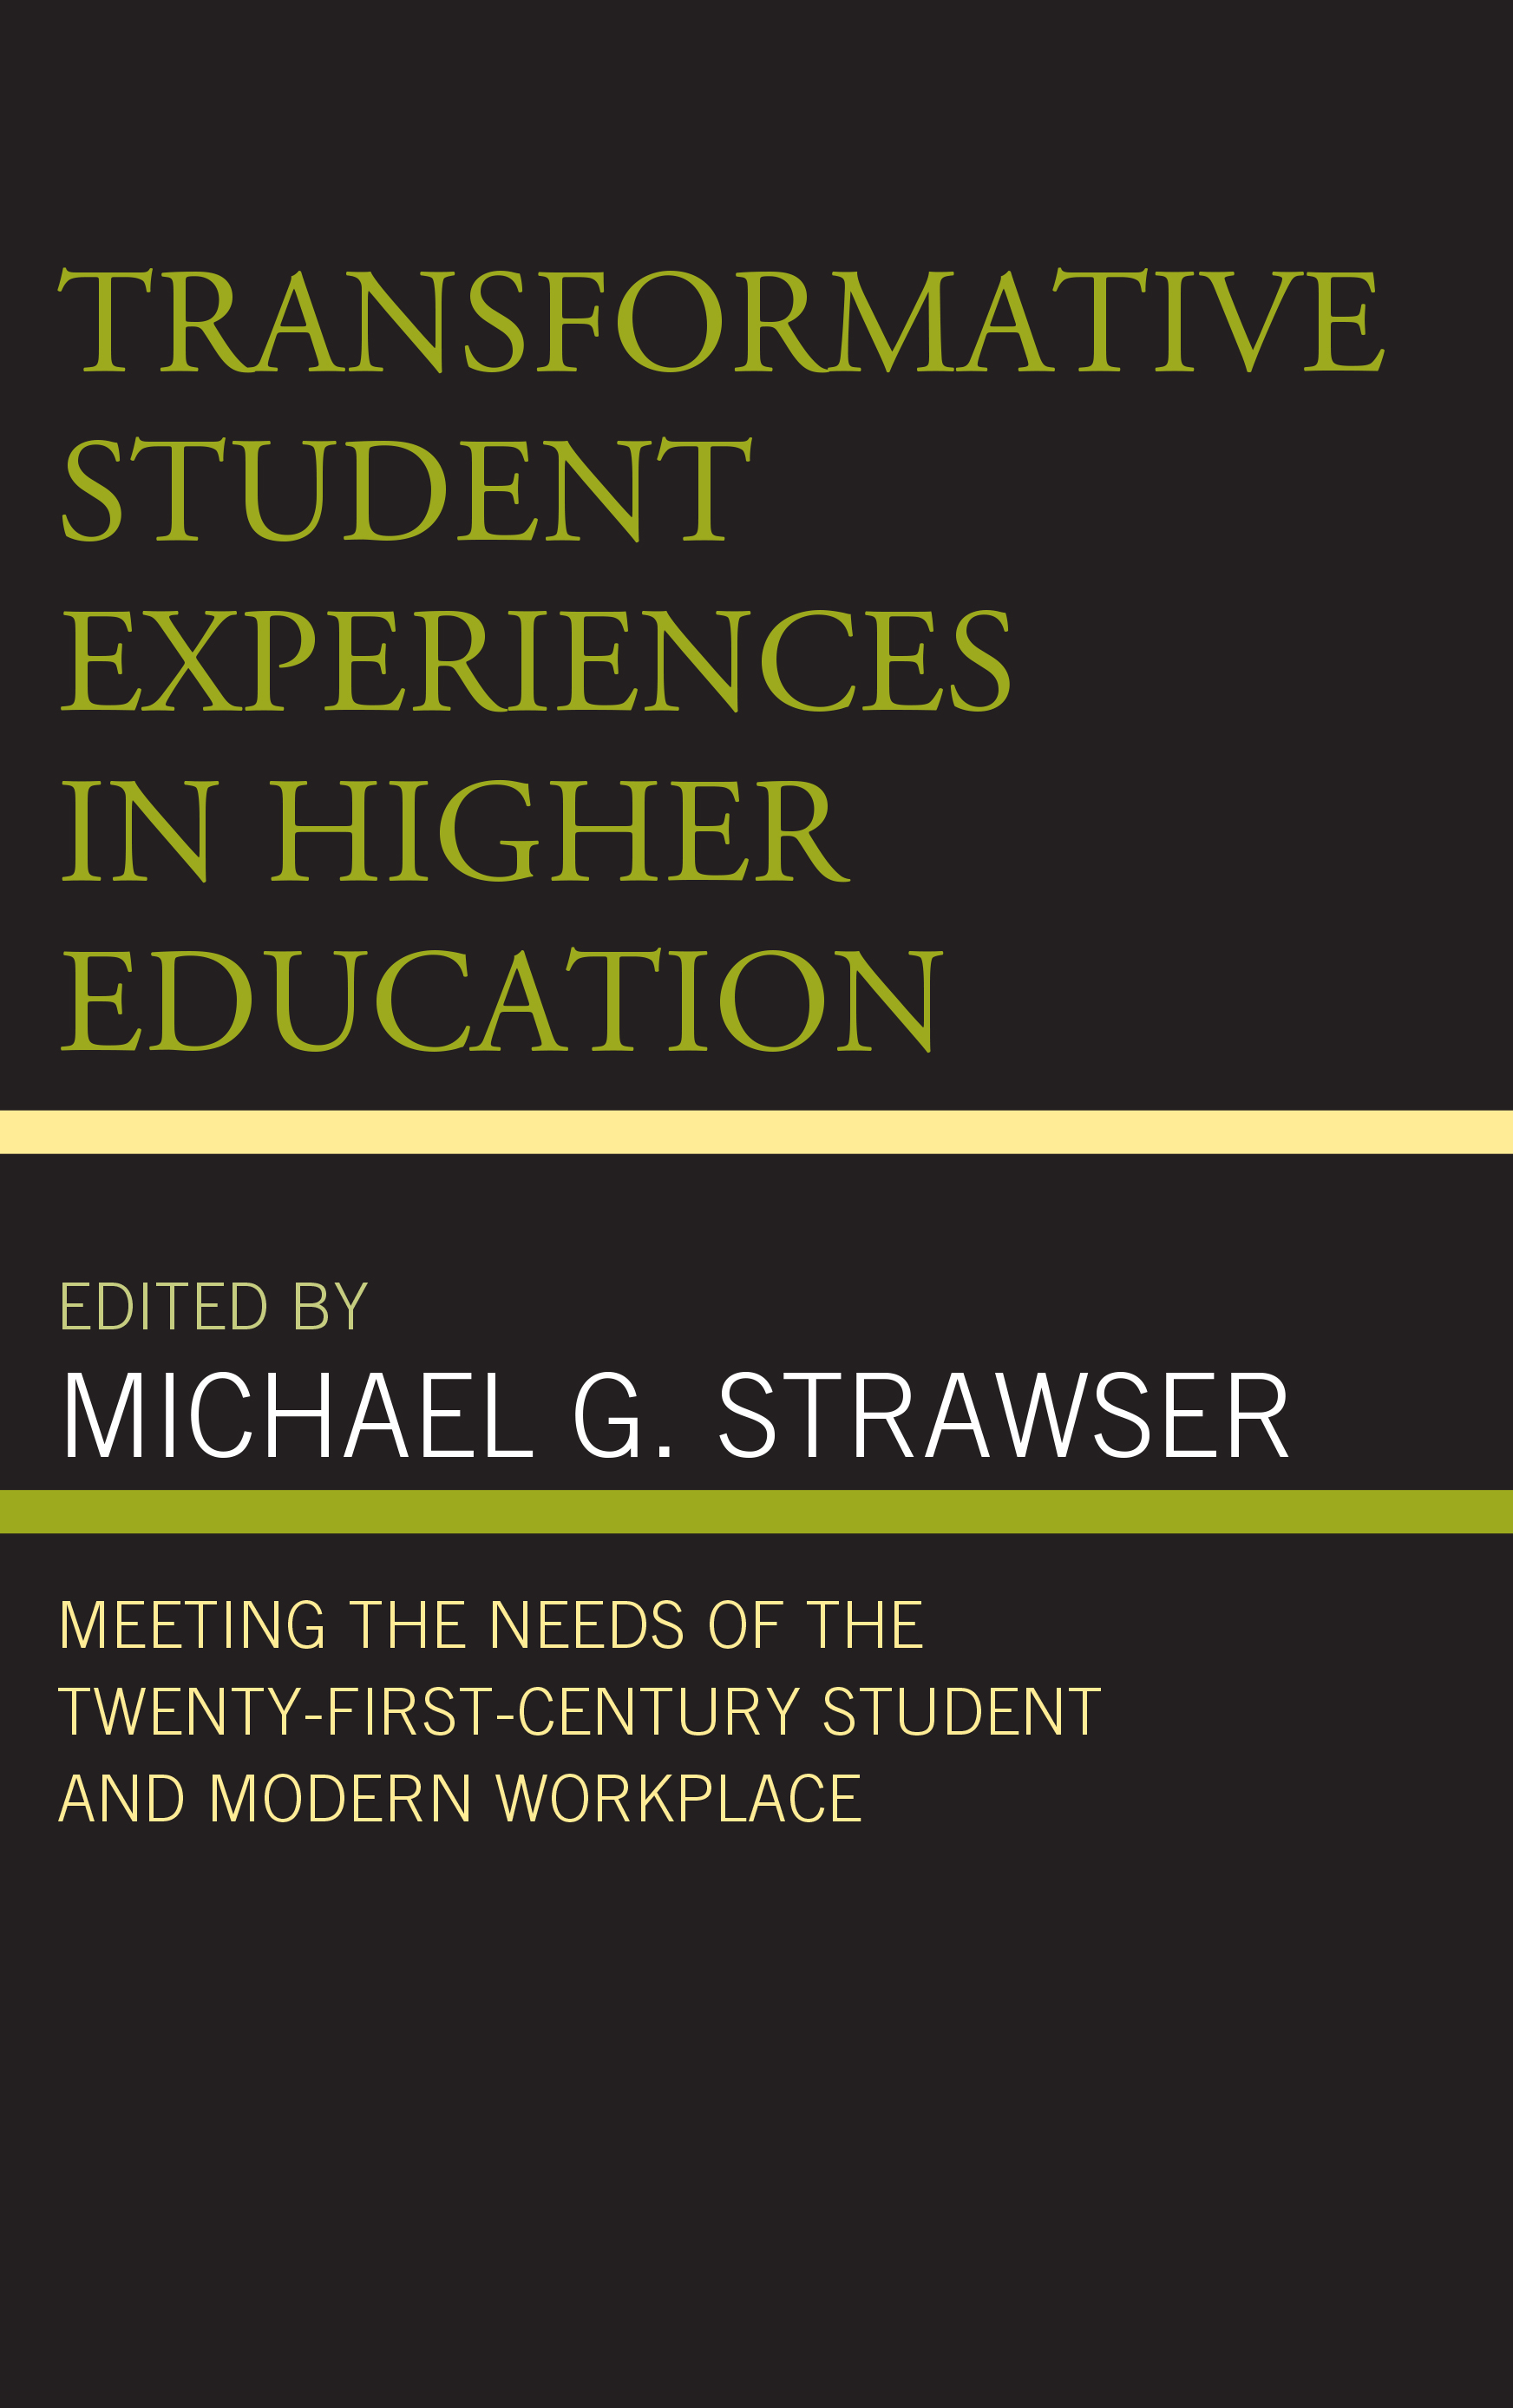 Transformative Student Experiences in Higher Education: Meeting the Needs of the Twenty-First Century Student and Modern Workplace